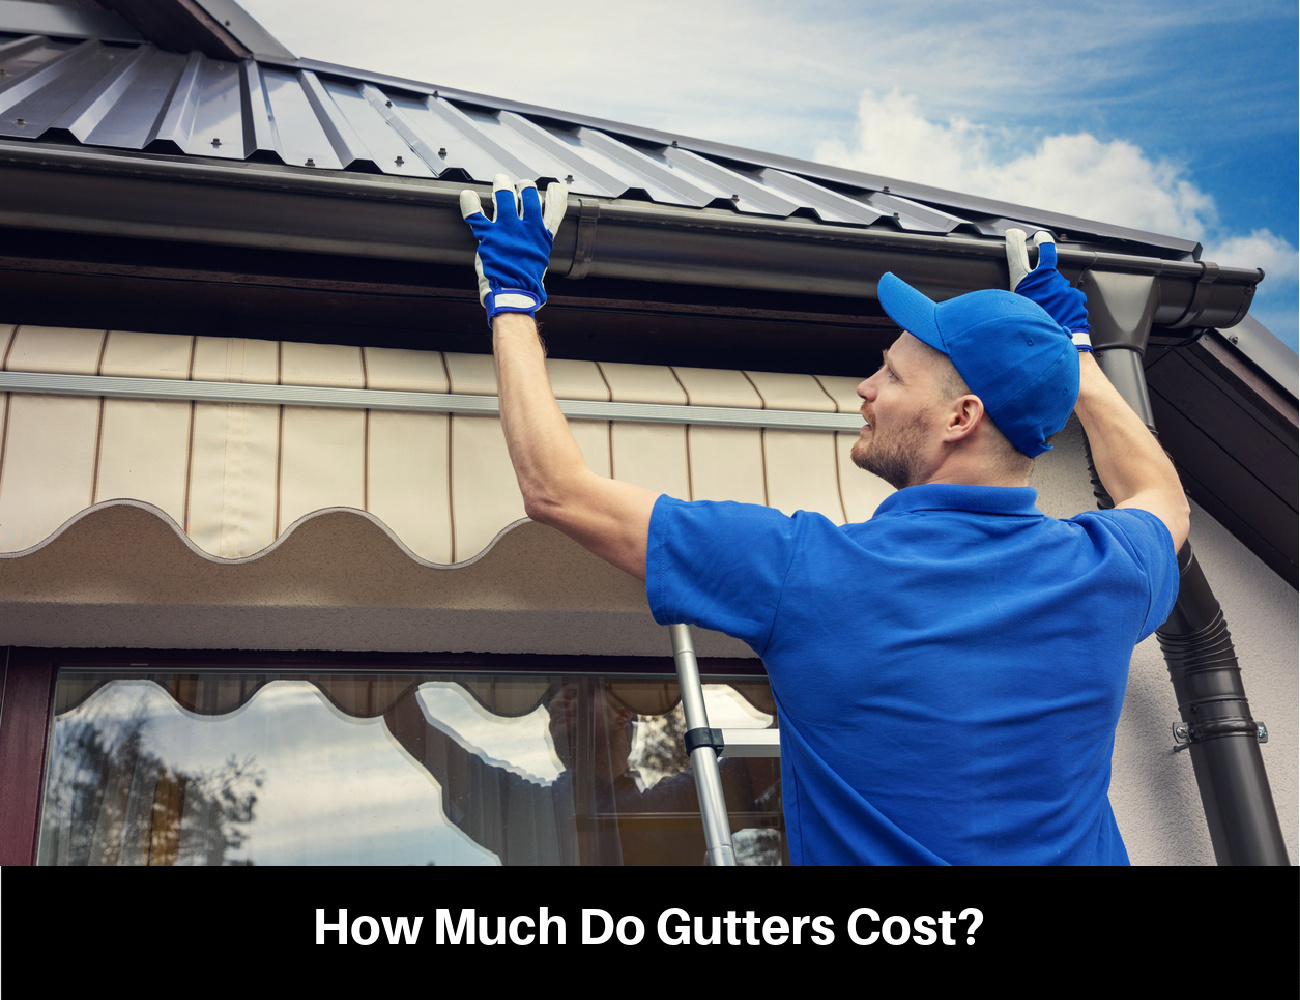 How Much Do Gutters Cost?